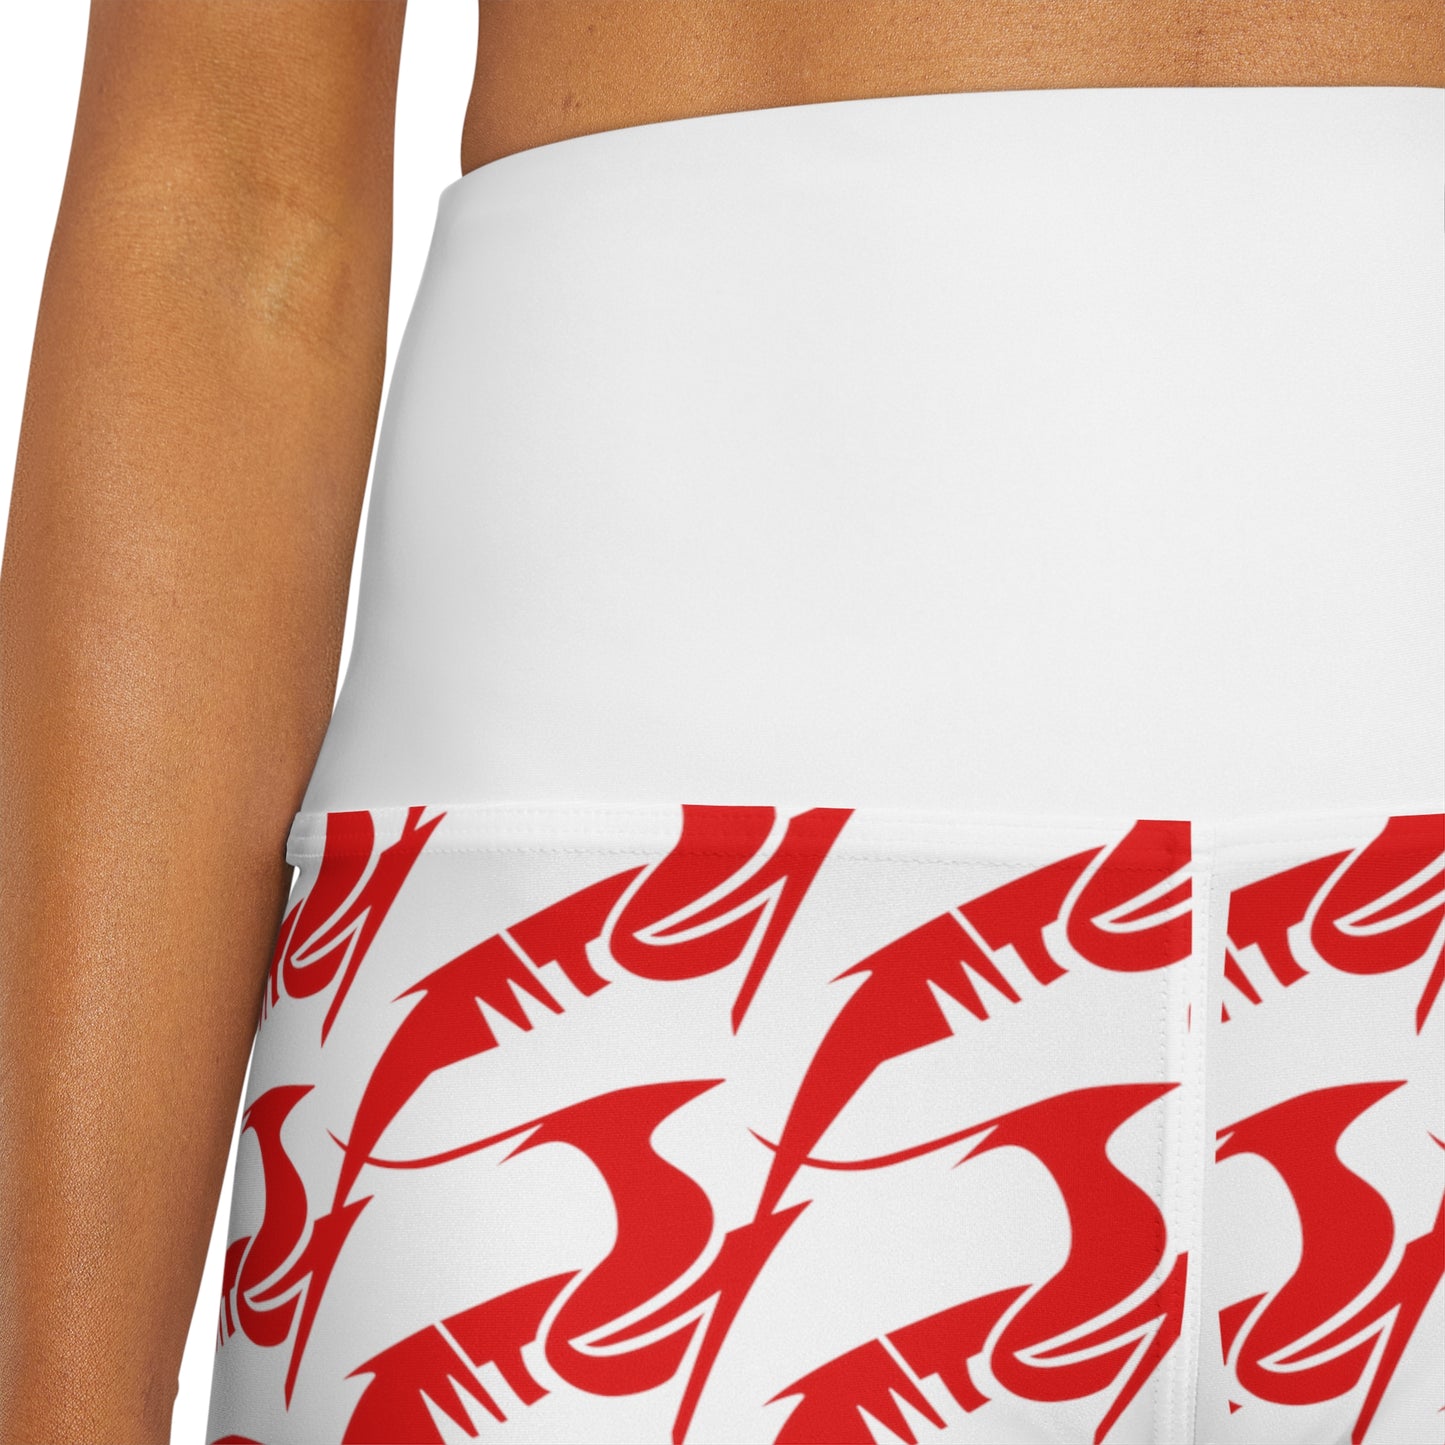 High Waisted Yoga Shorts Red on White